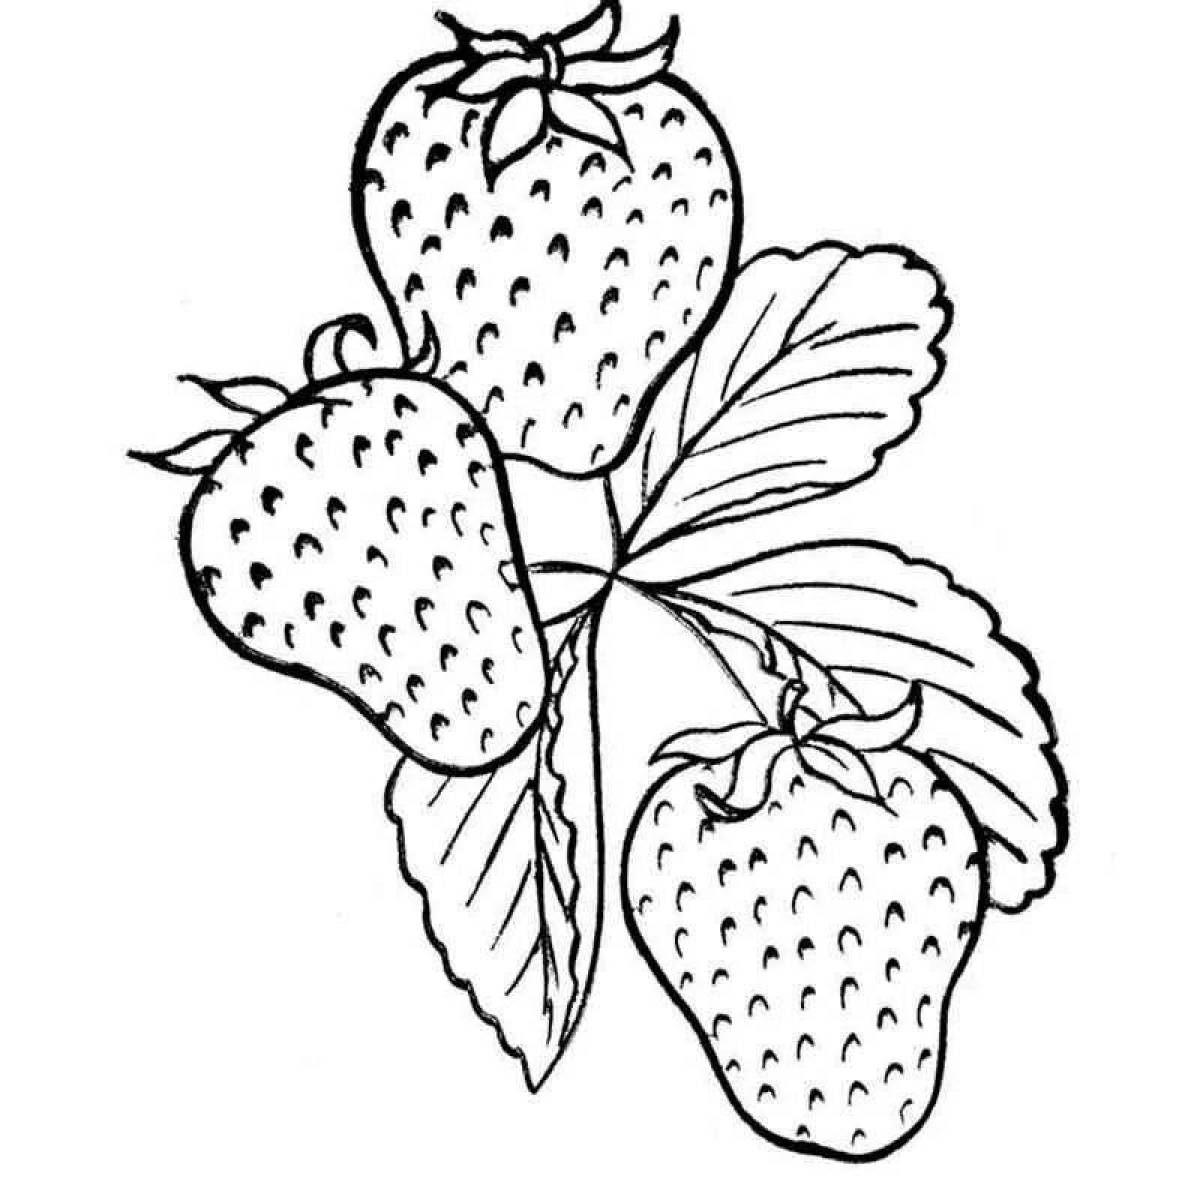 Amazing berries coloring book for kids